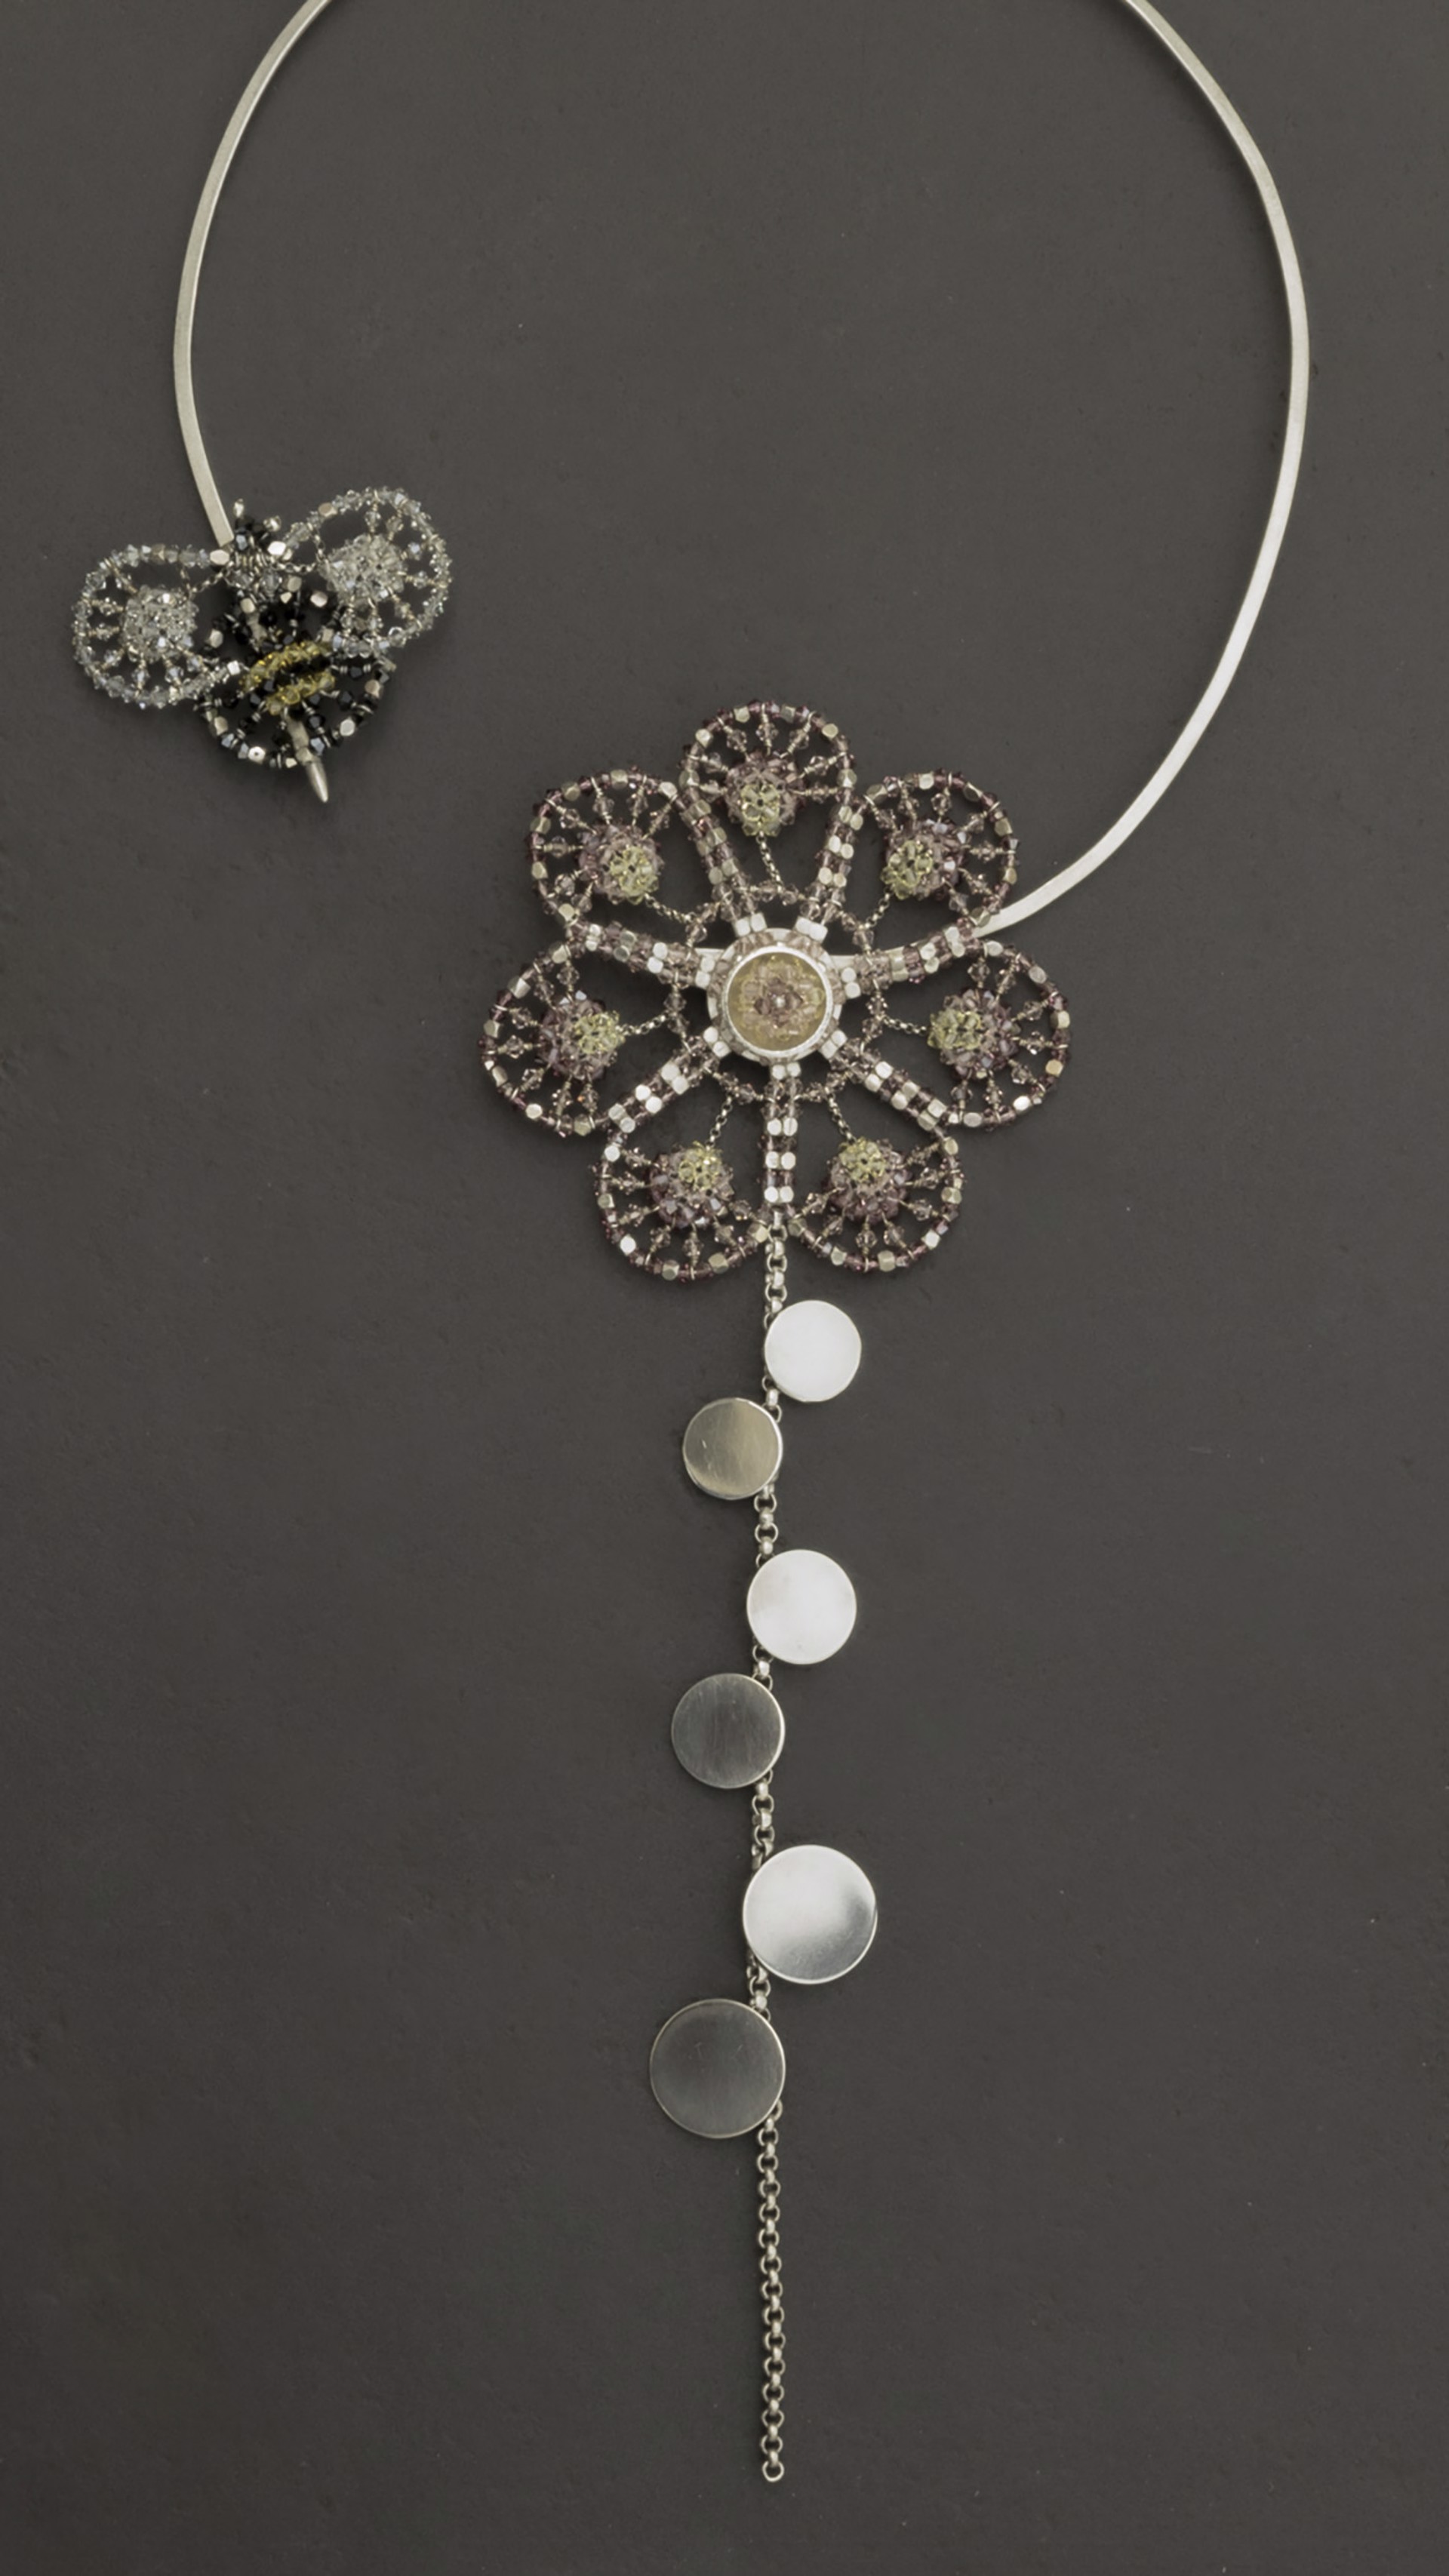 Pollination Necklace by Beth Lonsinger